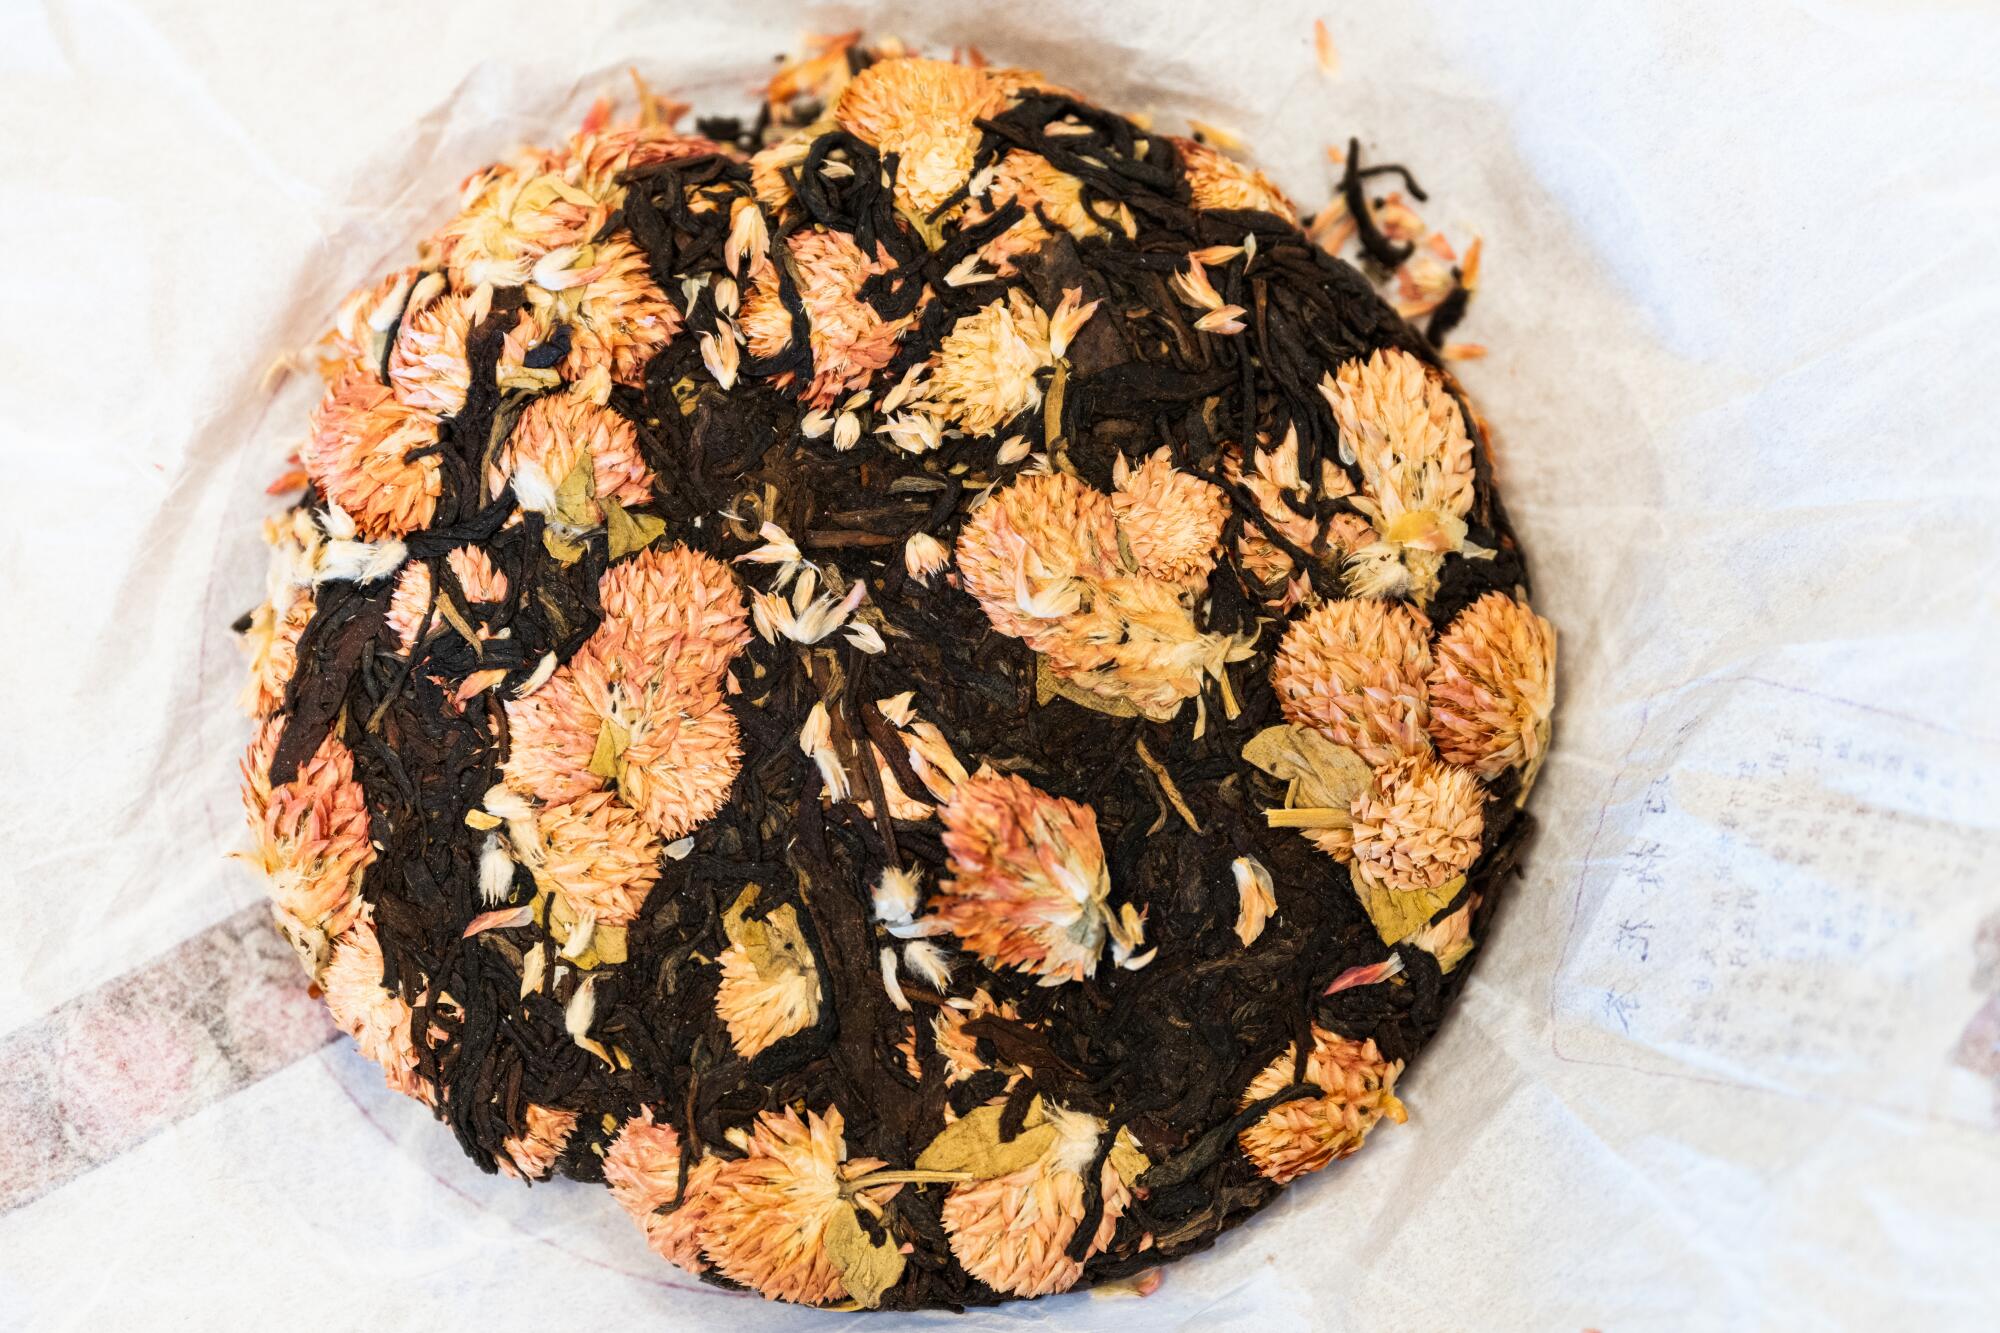 A unique tea cake studded with Chinese flowers at Grand Yunnan Tea.